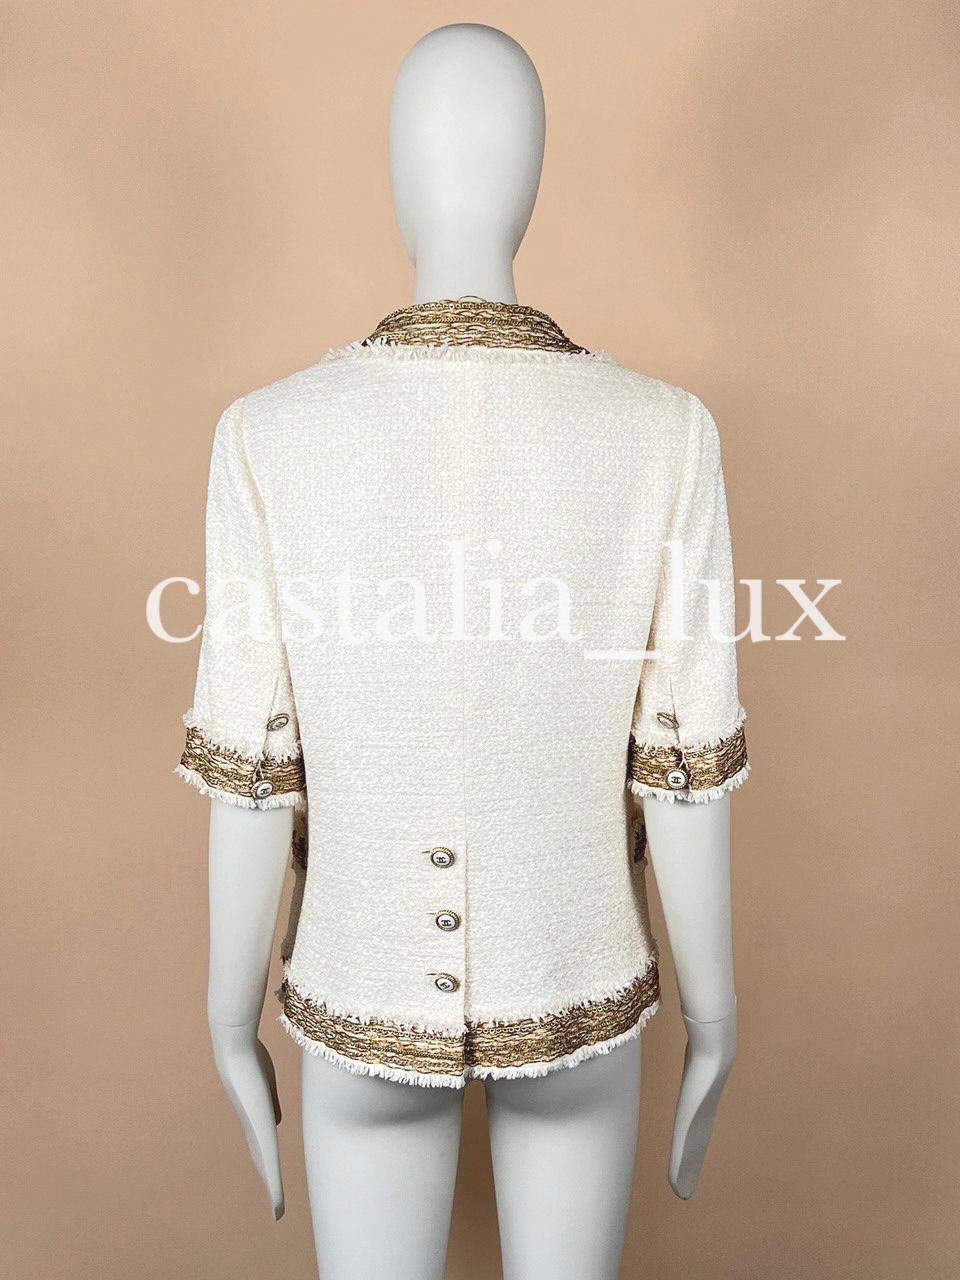 Chanel Extremely Rare Chain Accents Jacket from Ad Campaign For Sale 10